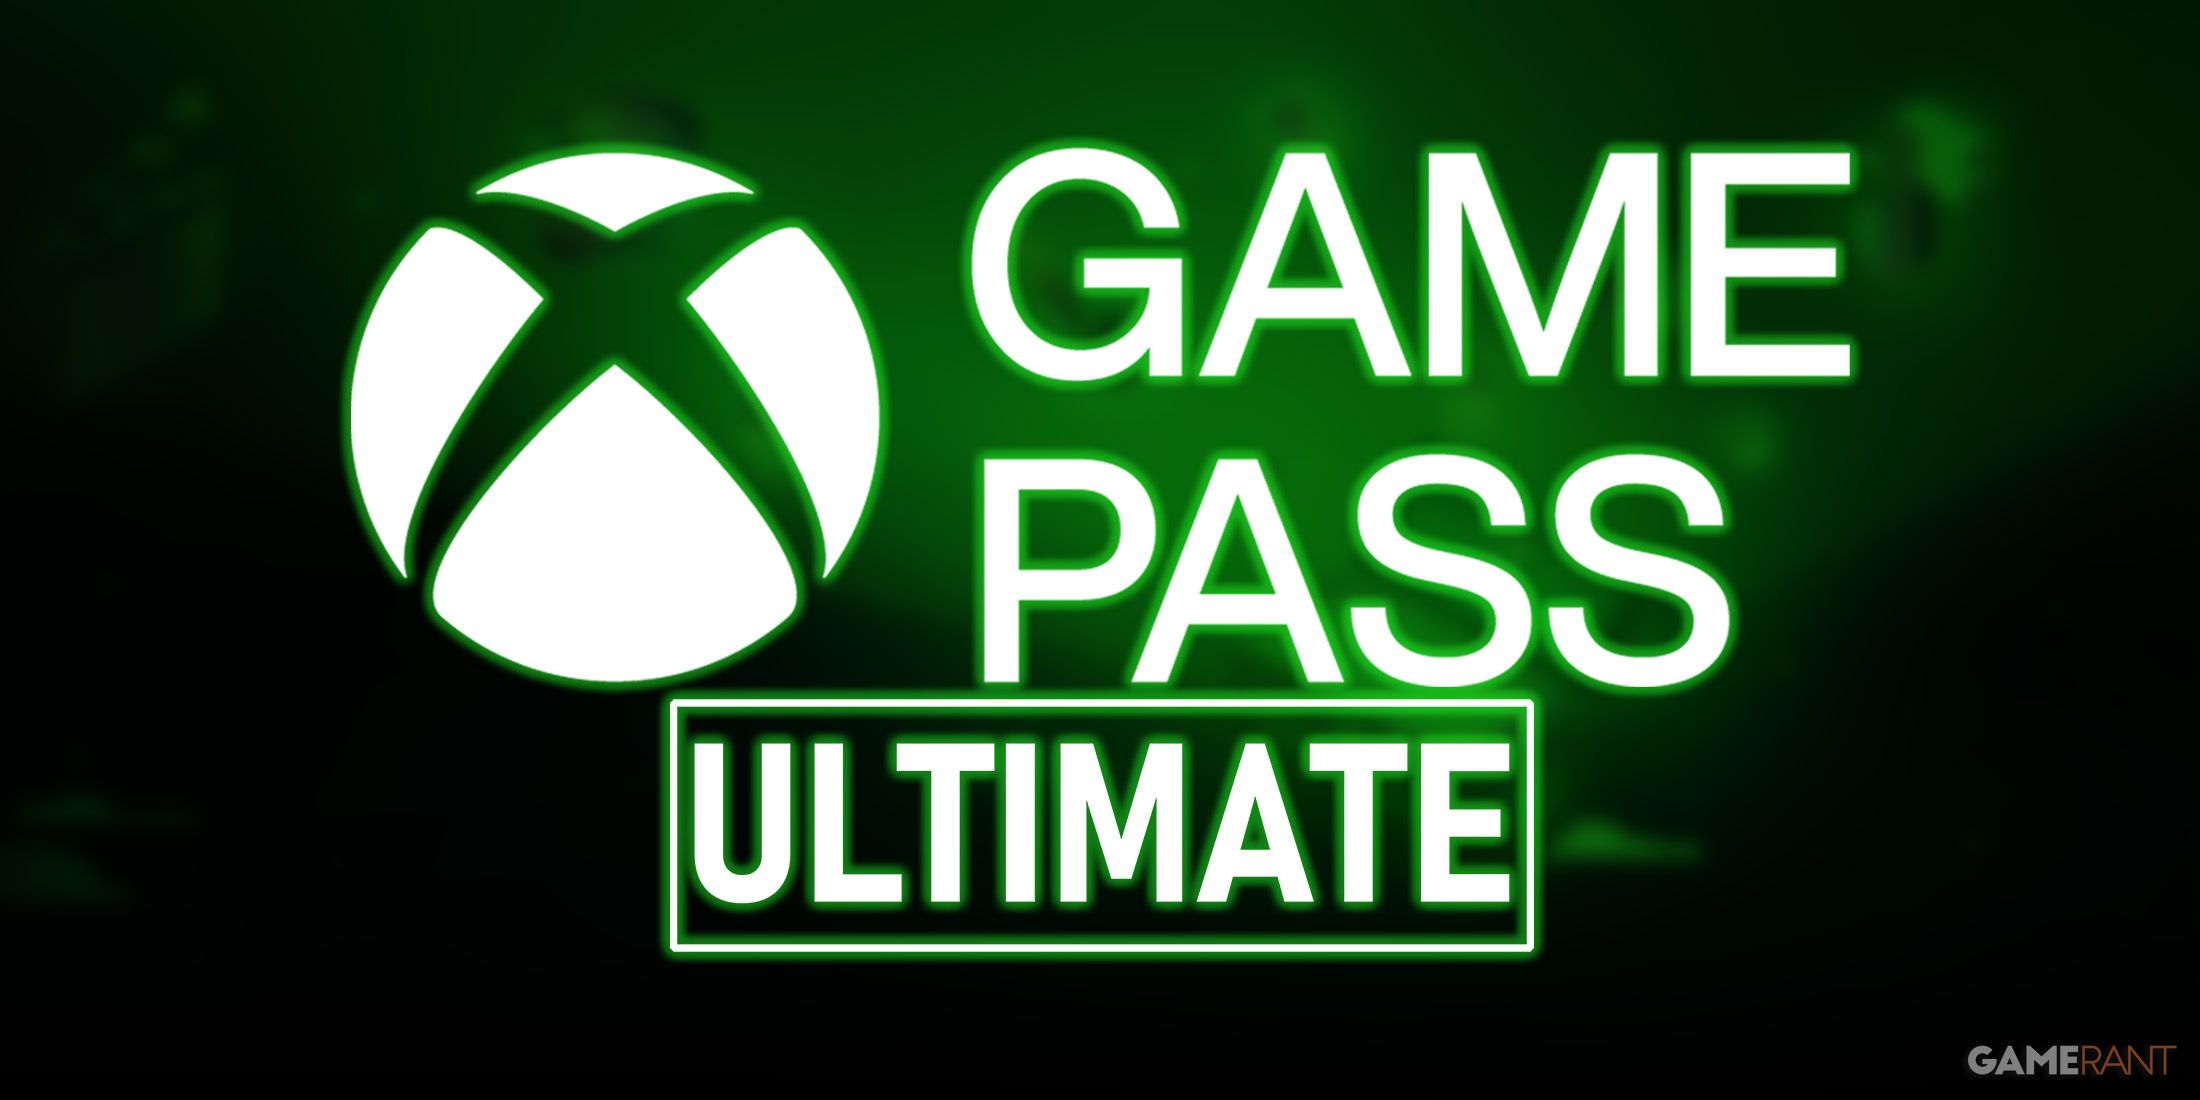 Xbox Game Pass Ultimate on blurred treasure chest key art